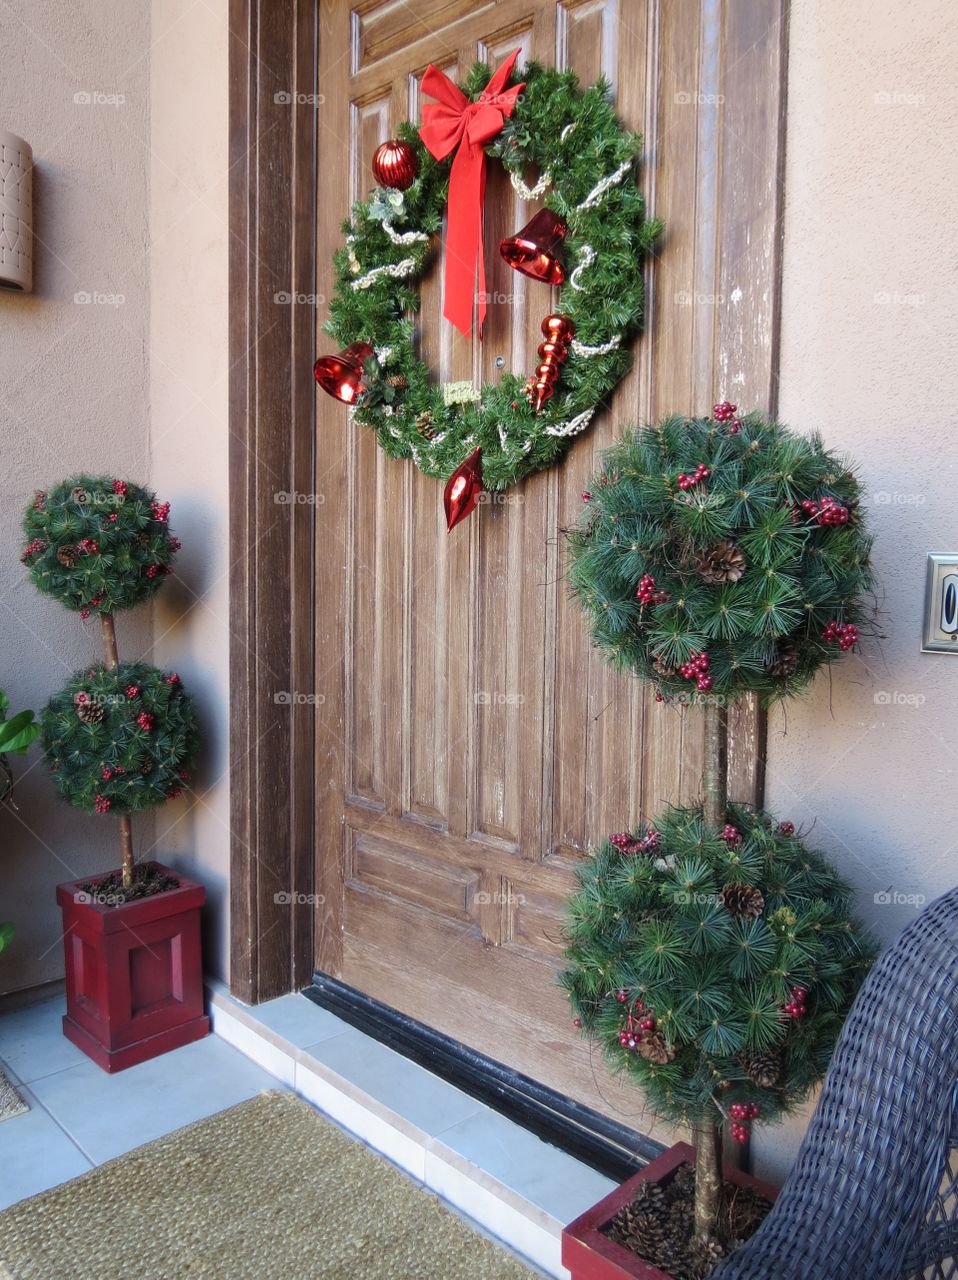 Christmas wreath and topiaries.